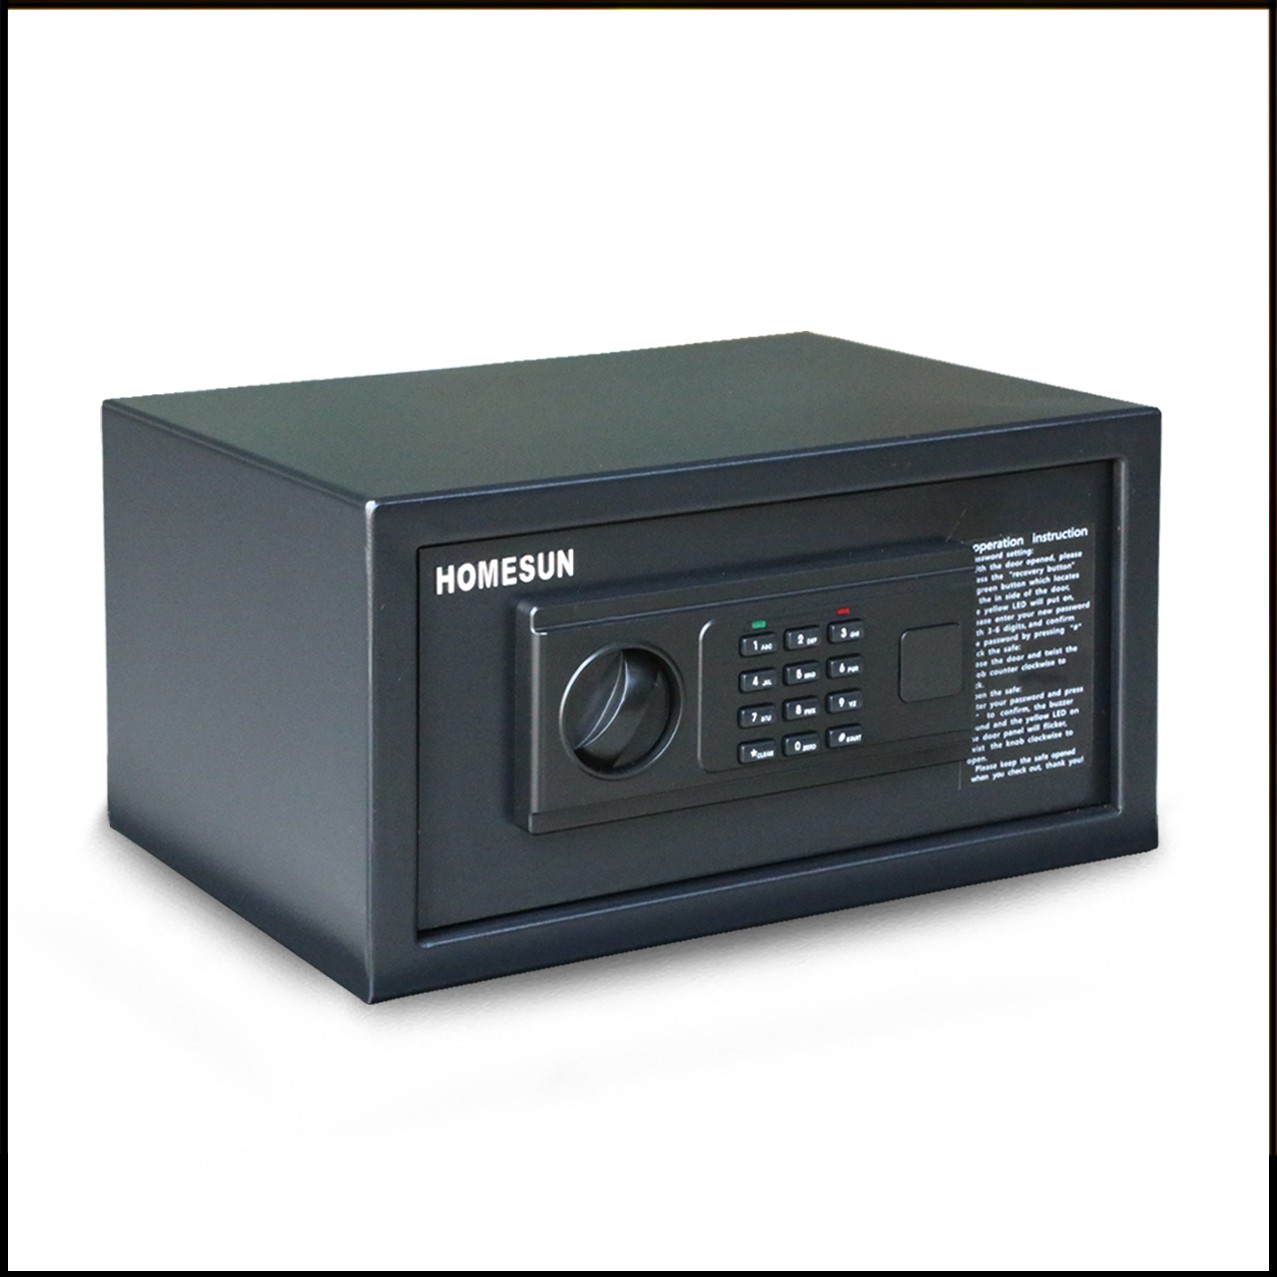 Hotel Room Safe factory and suppliers - wholesale cheap best